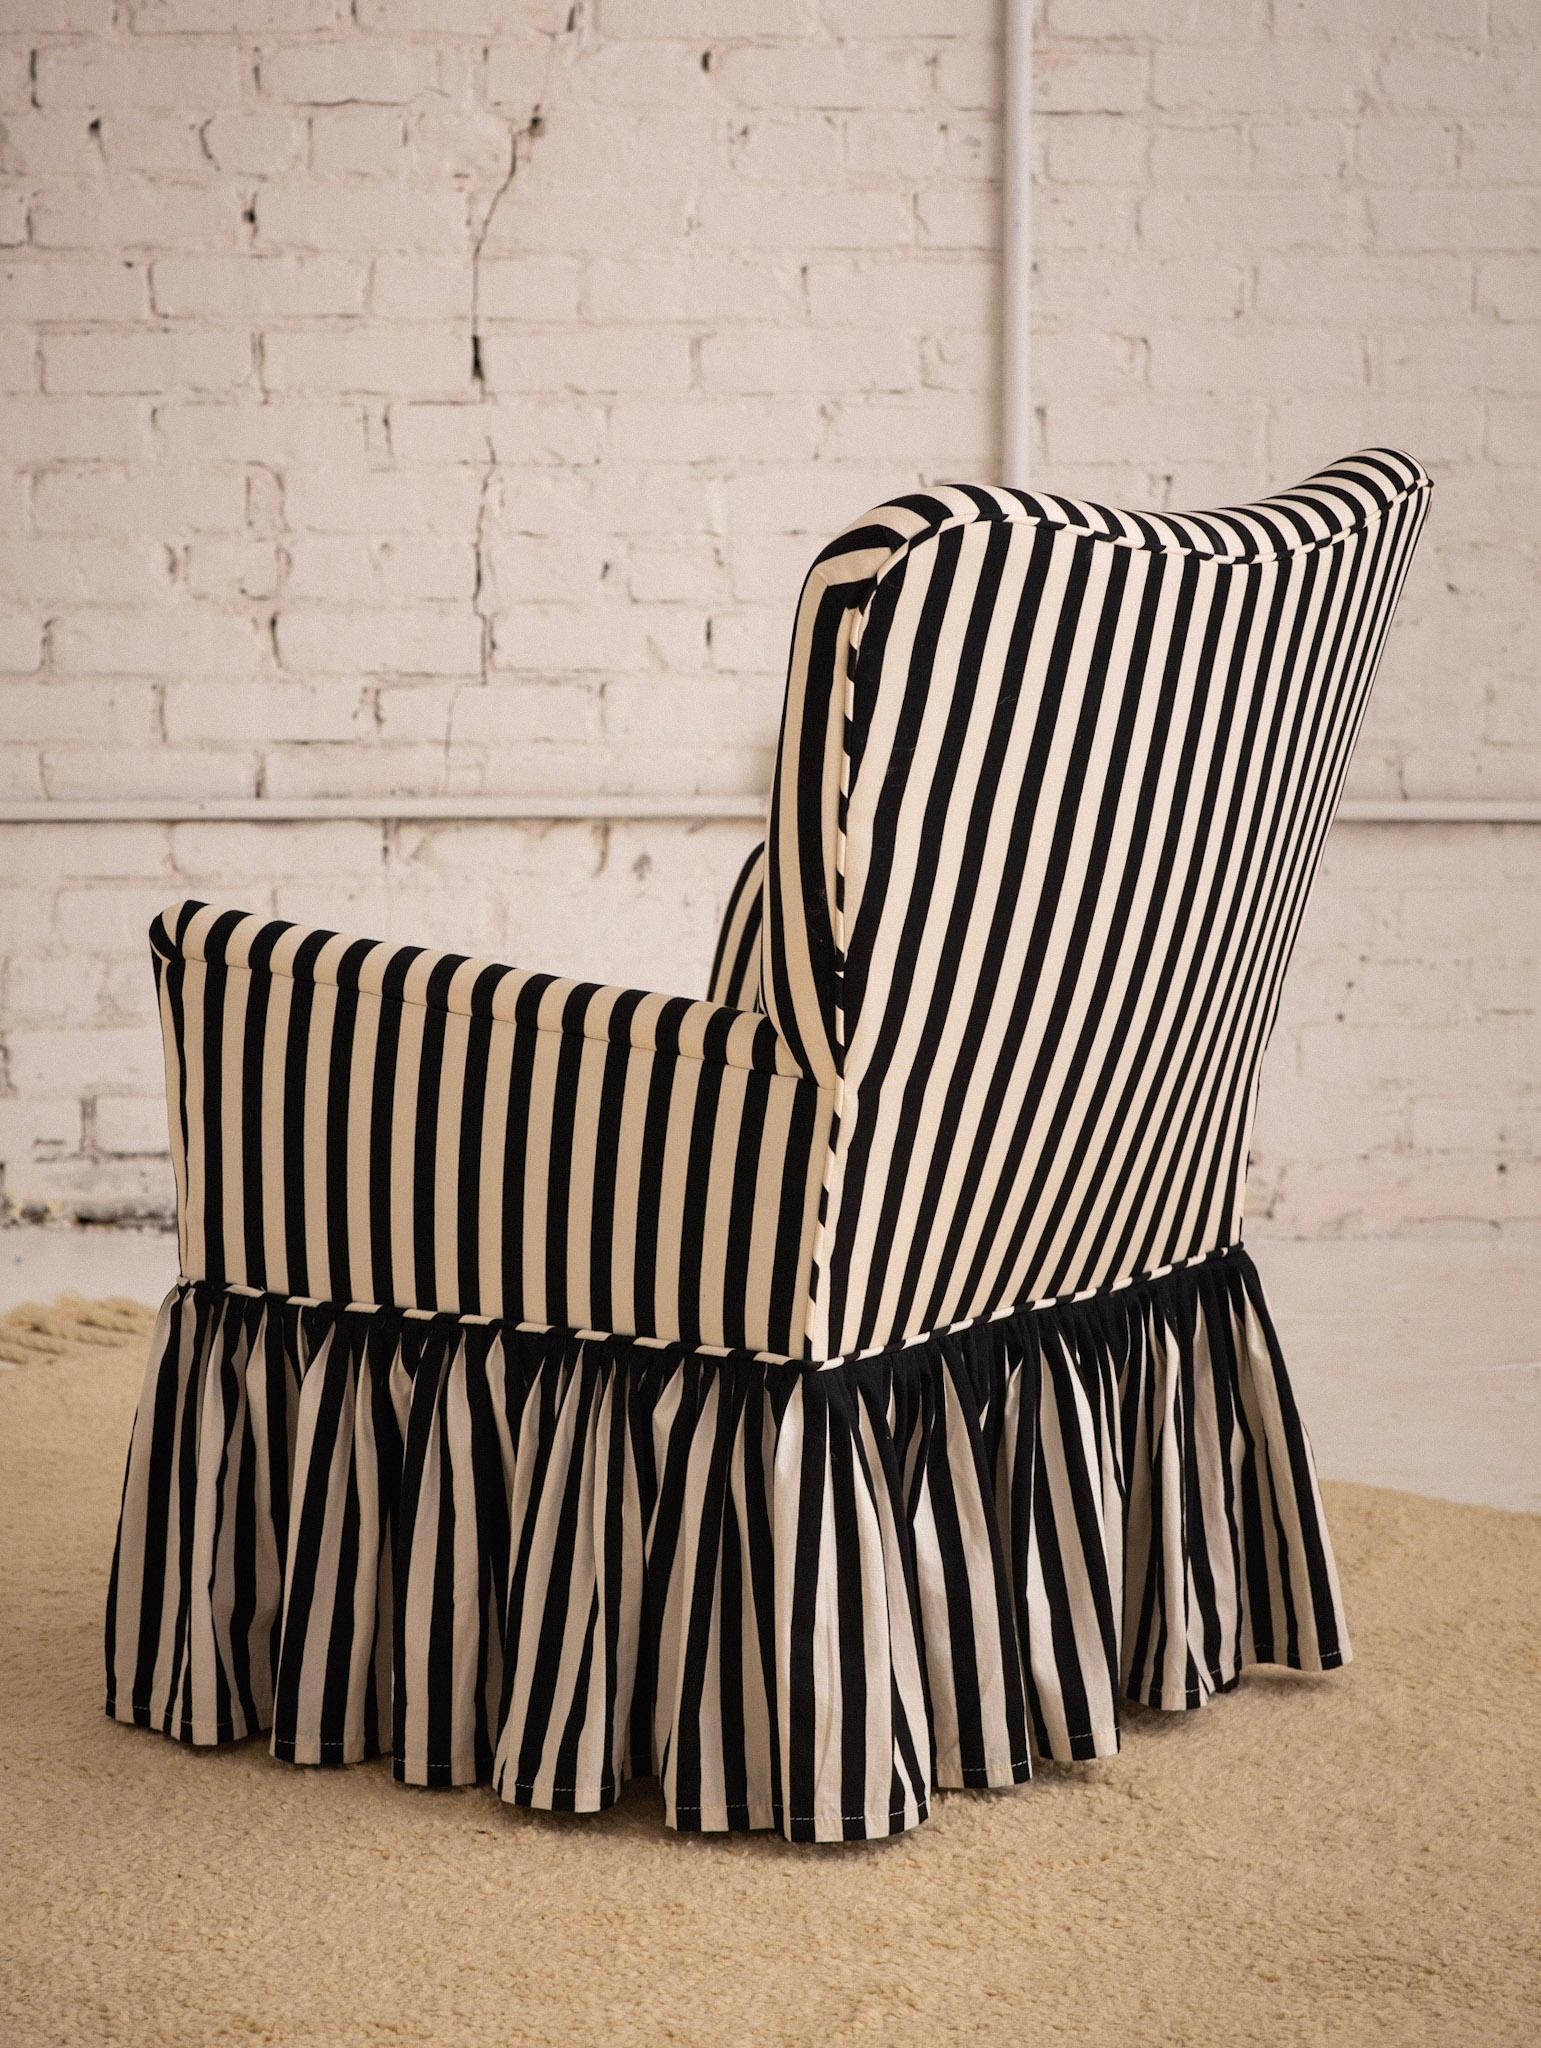 Rustic Mid Century Accent Chair in Black and White Stripe with Ruffle Skirt